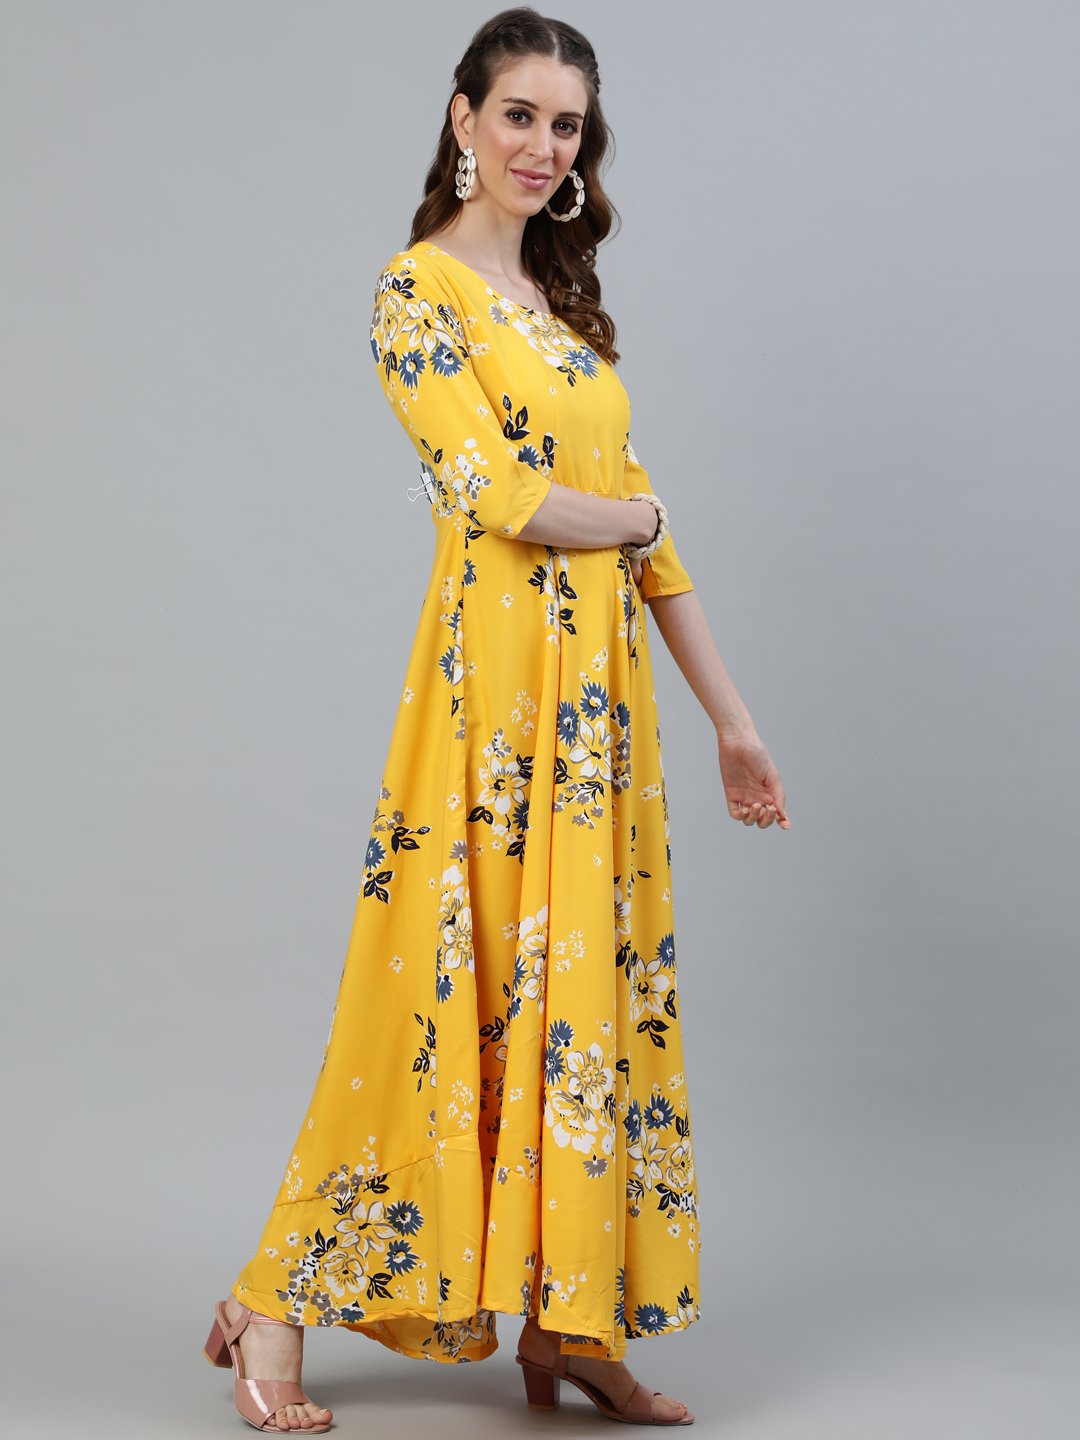 Women's Yellow Printed Maxi Dress With Three Quarter Sleeves - Nayo Clothing